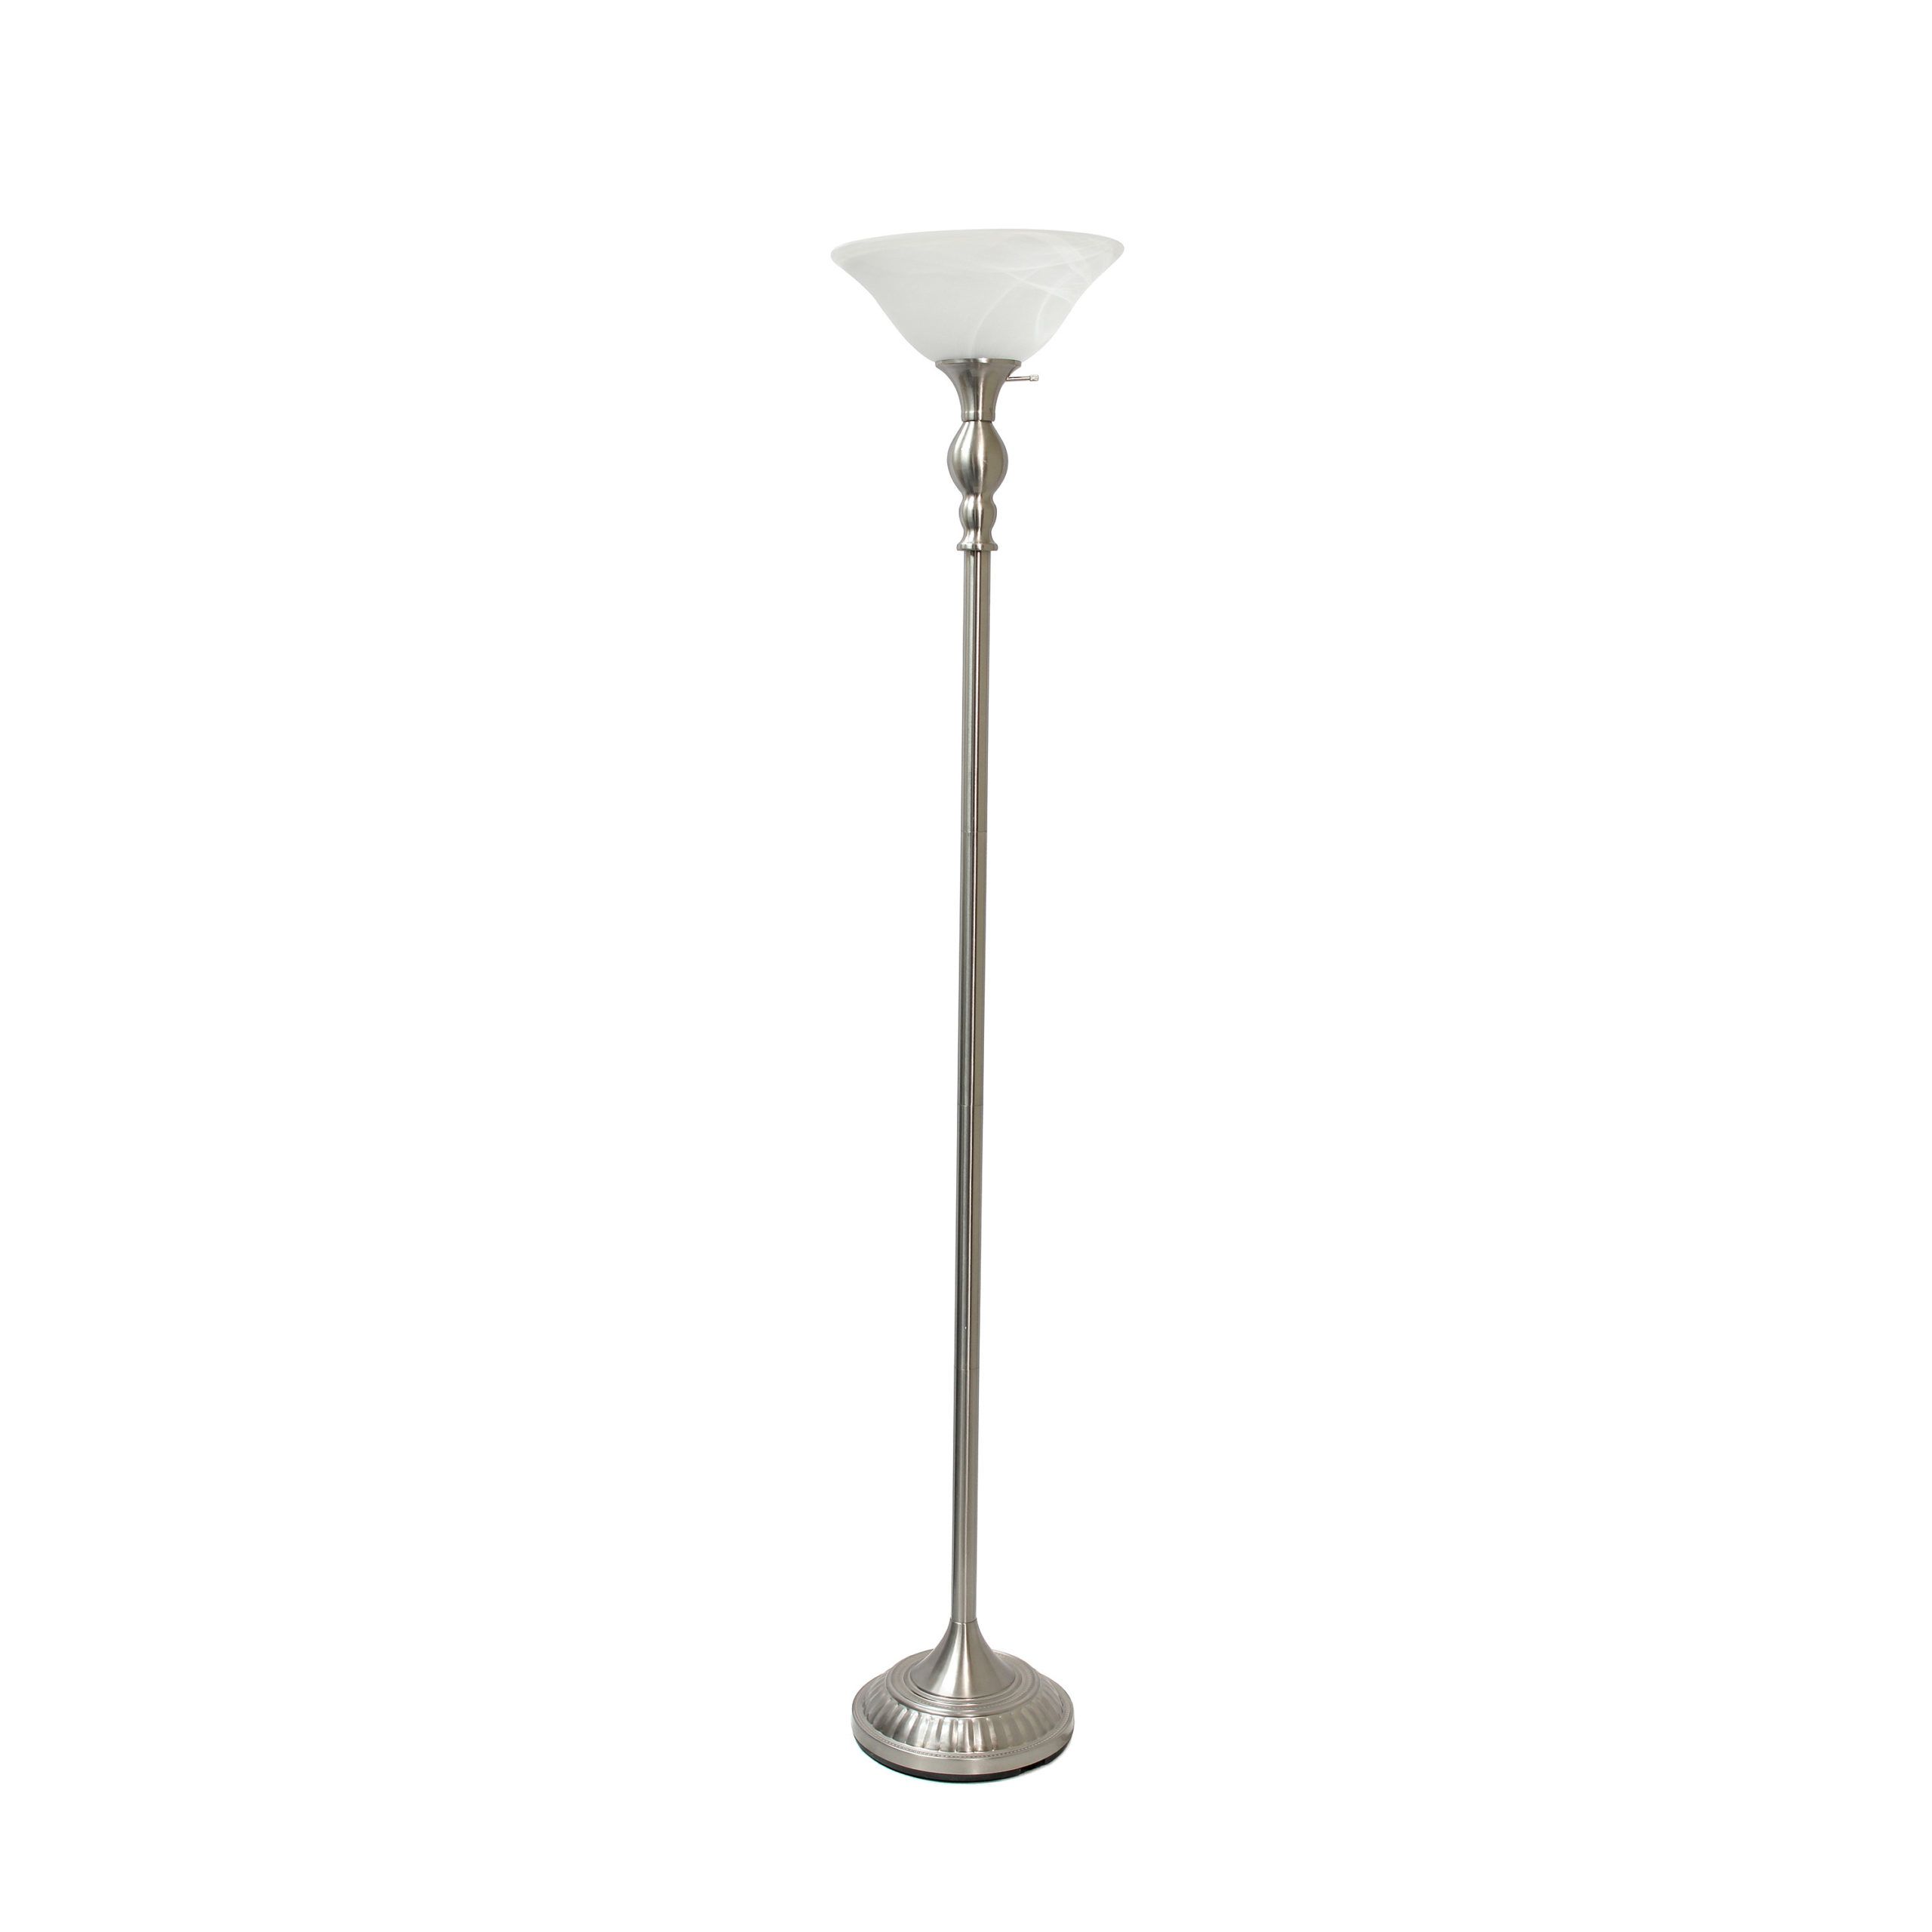 Elegant Designs 1 Light Torchiere Floor Lamp With Marbleized White Glass  Shade, Brushed Nickel | All The Rages With Glass Satin Nickel Floor Lamps (View 7 of 20)